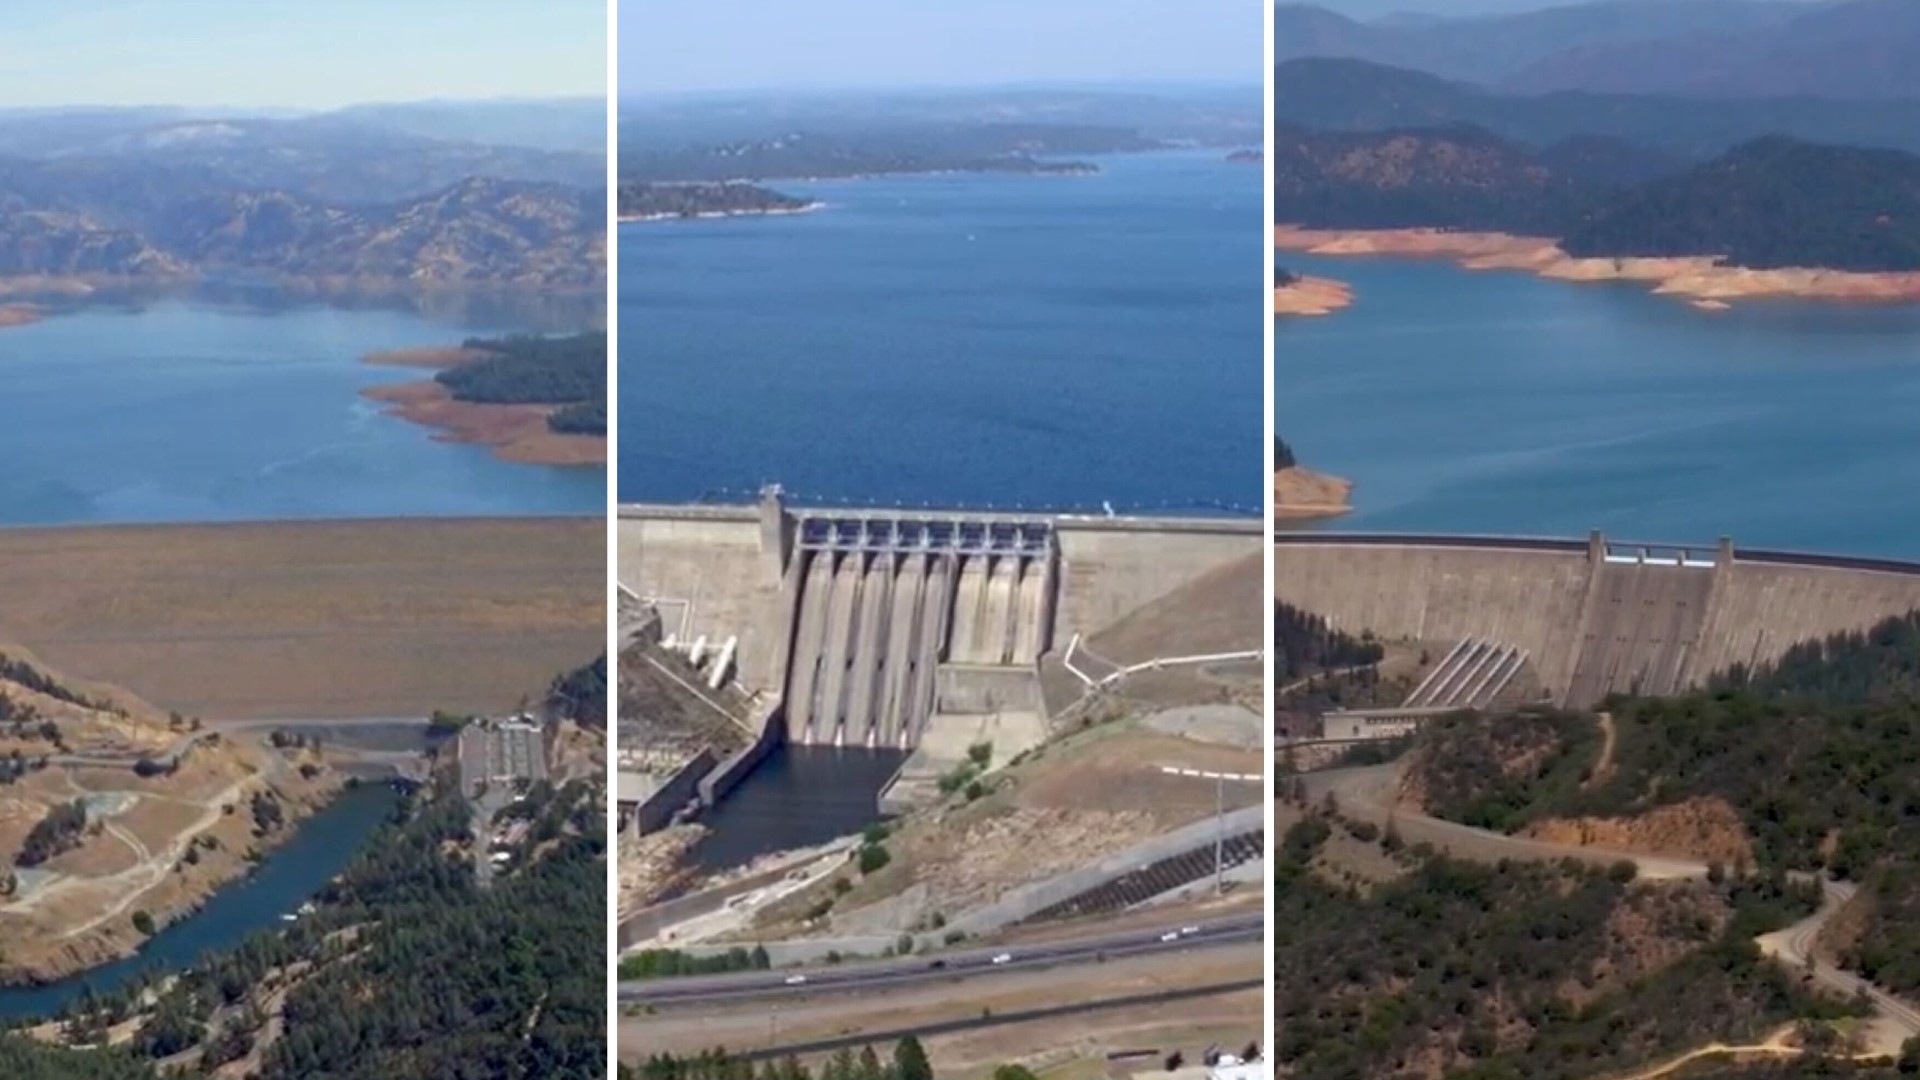 The water supply in California’s dams is decreasing rapidly, and Los Angeles is getting closer to “zero-day.”